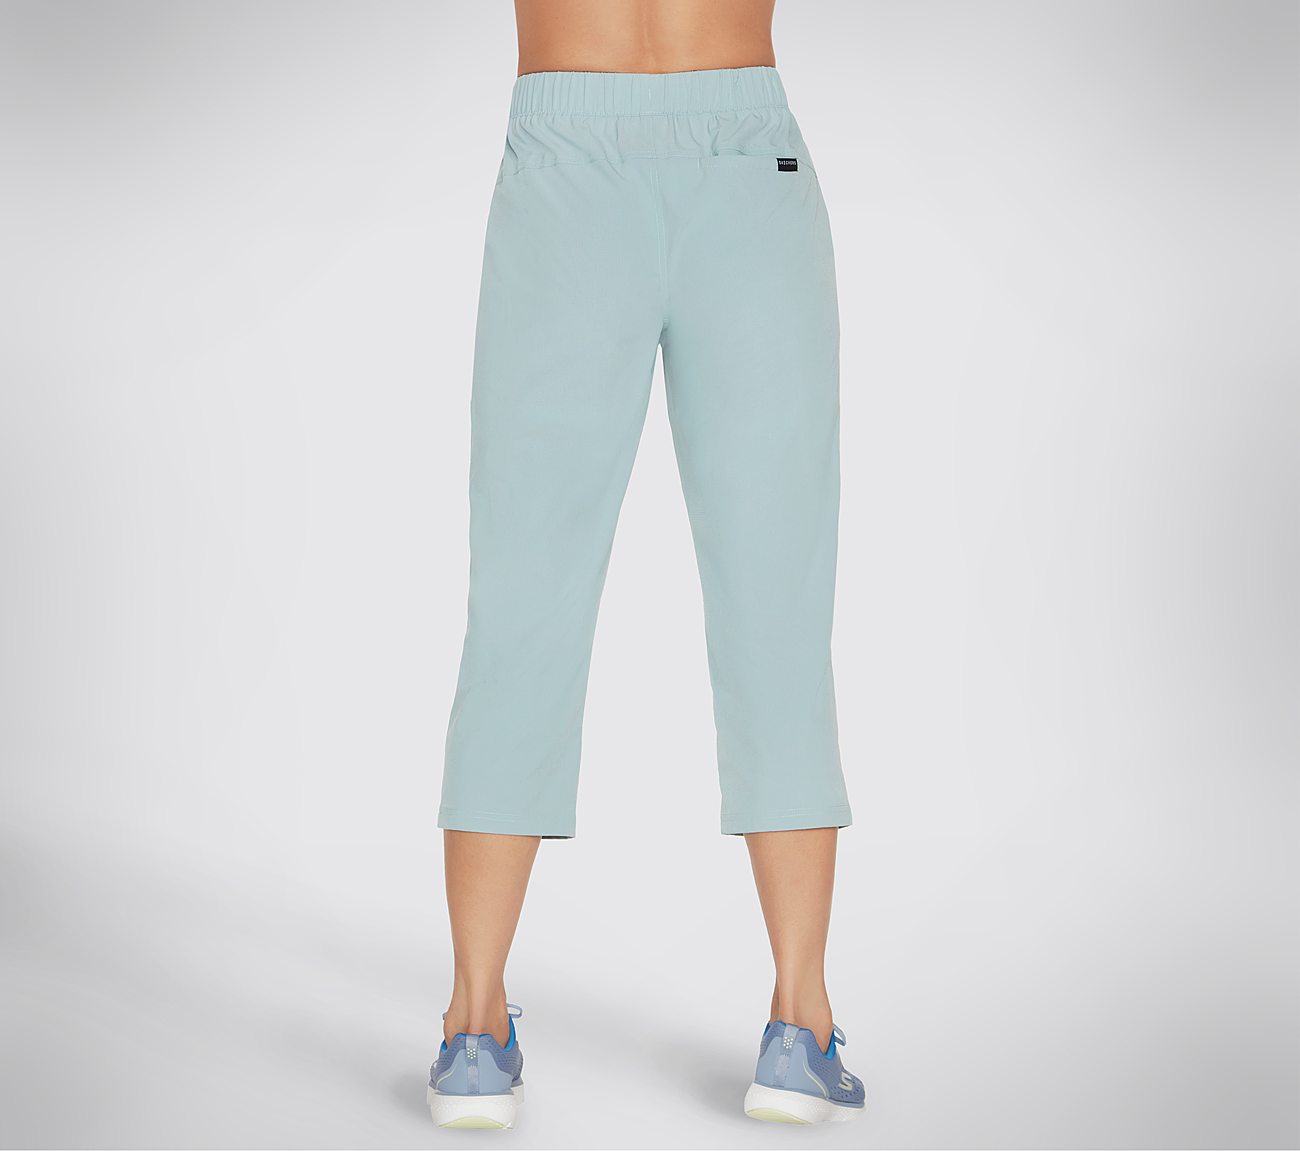 INCLINE MIDCALF PANT, LIGHT GREY/BLUE Apparel Top View